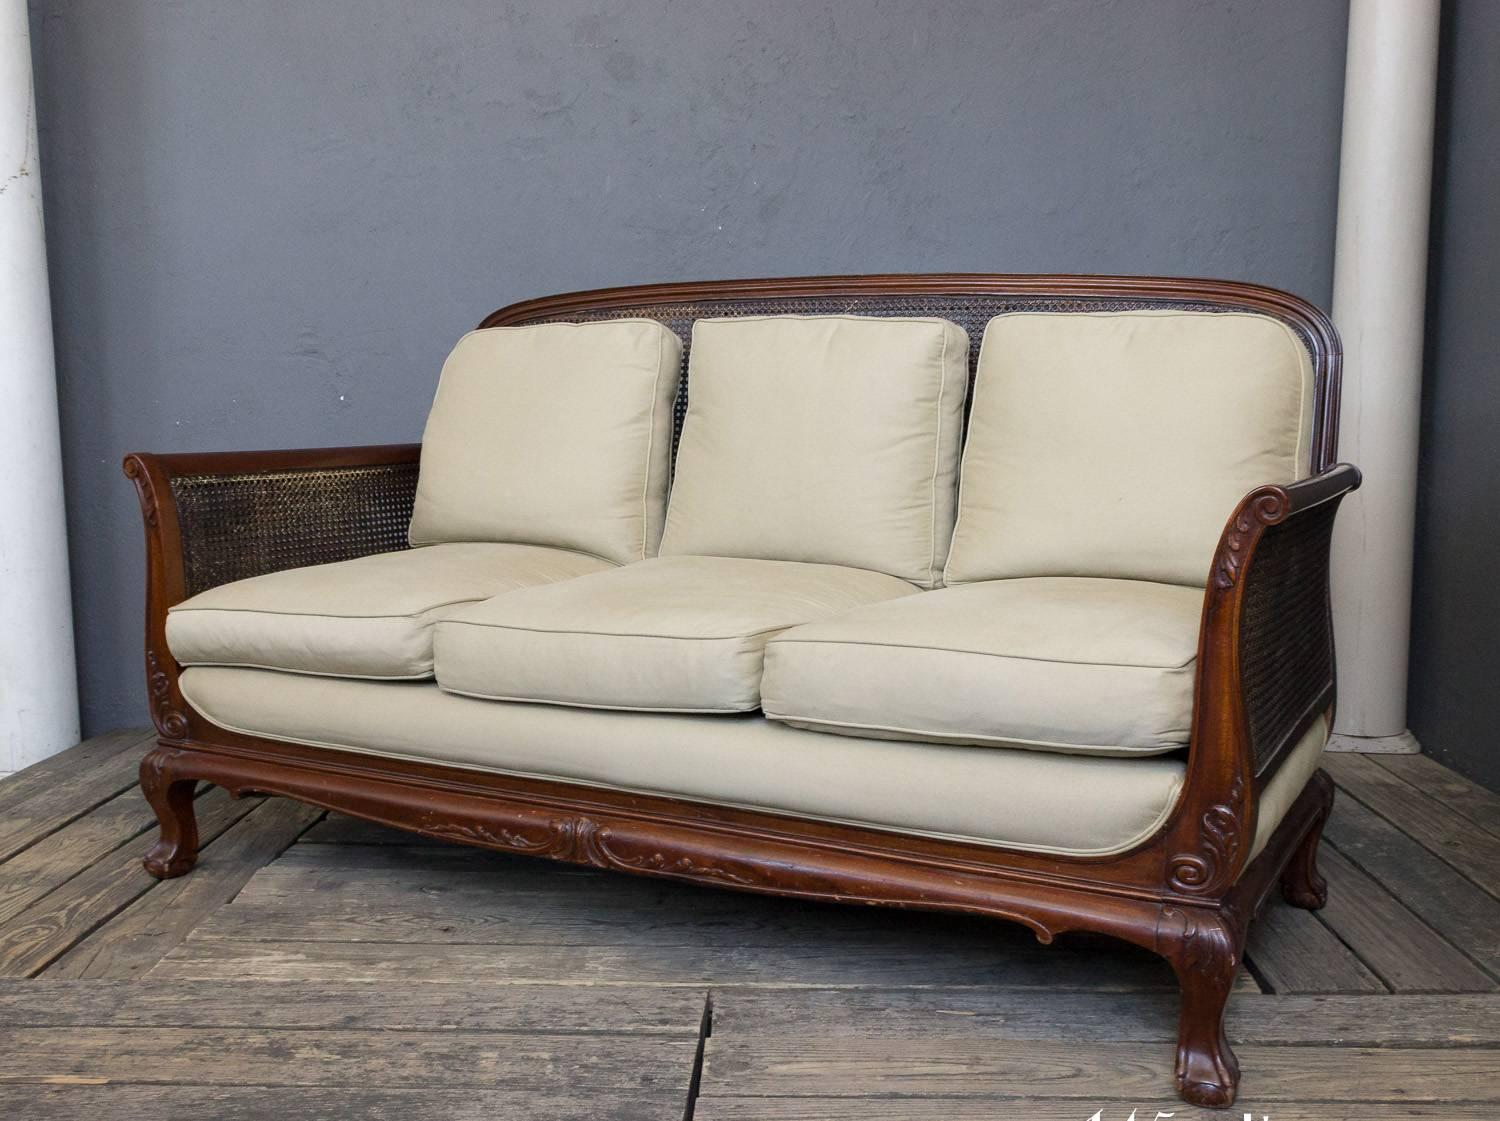 19th century Anglo-Indian mahogany sofa with caned back and sides upholstered in a cotton twill with down wrapped back cushions. The sofa is in good condition, the frame needs some touch ups to the finish.  The fabric shows normal age but can easily